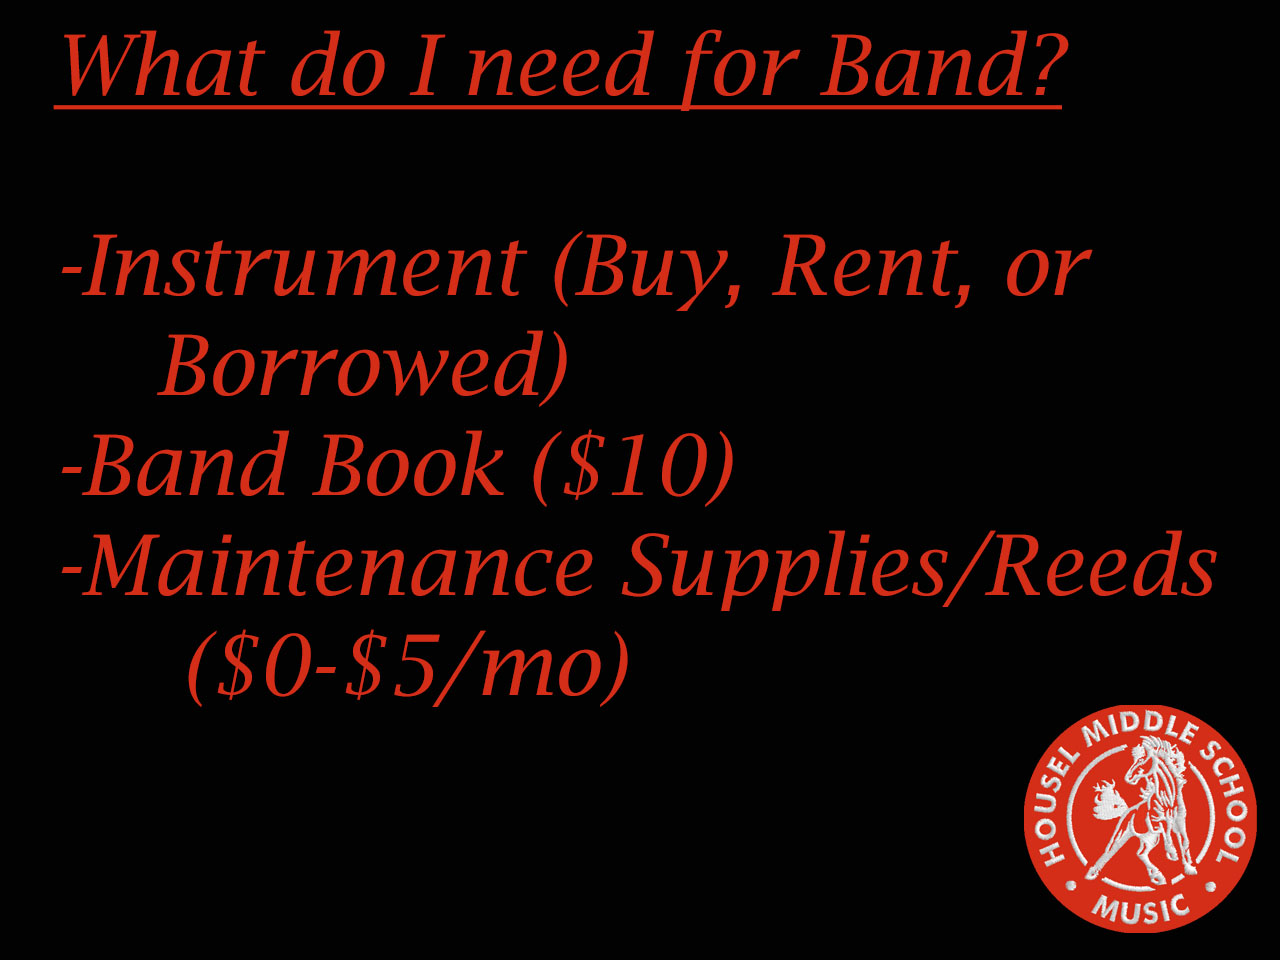 What do I need for band?